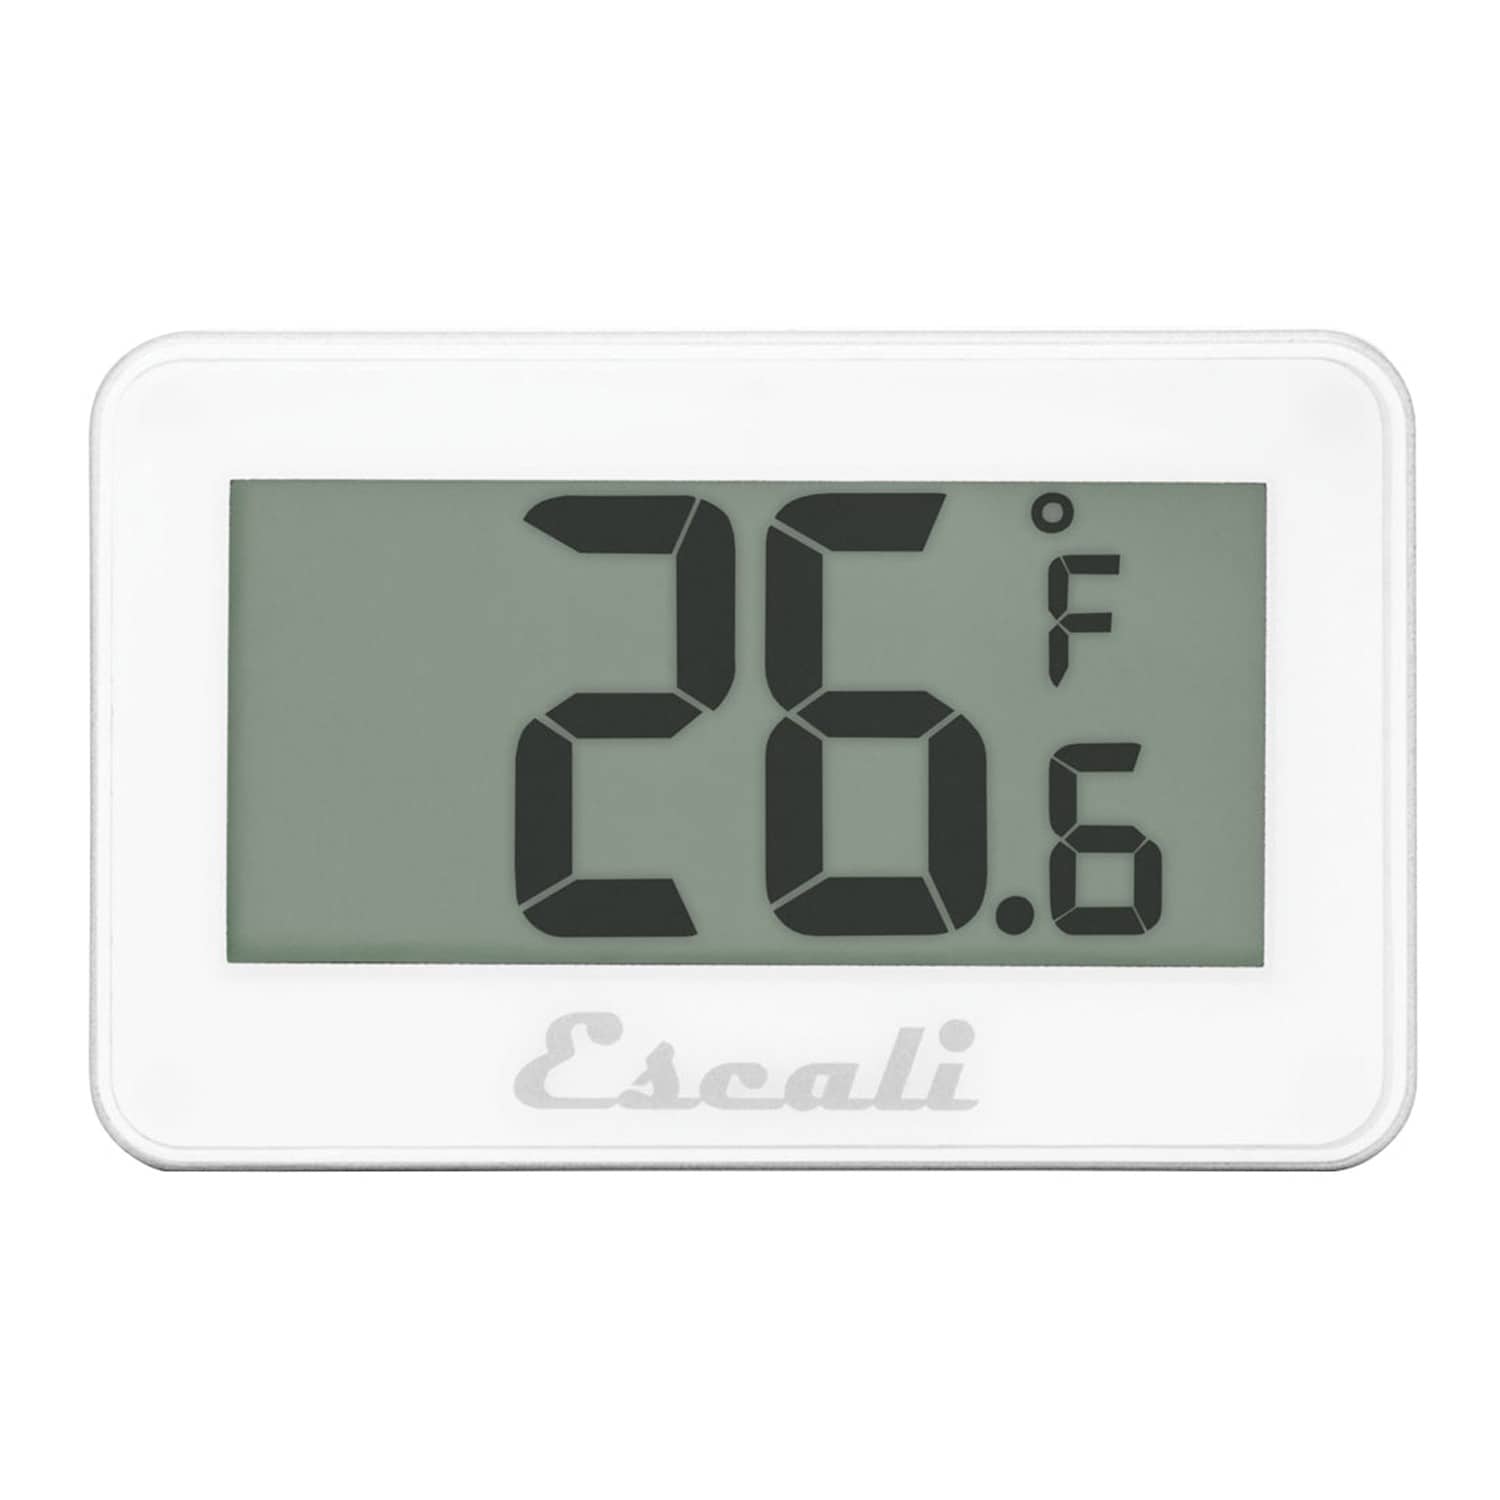 Fridge Thermometers - Shop Online & In-Store